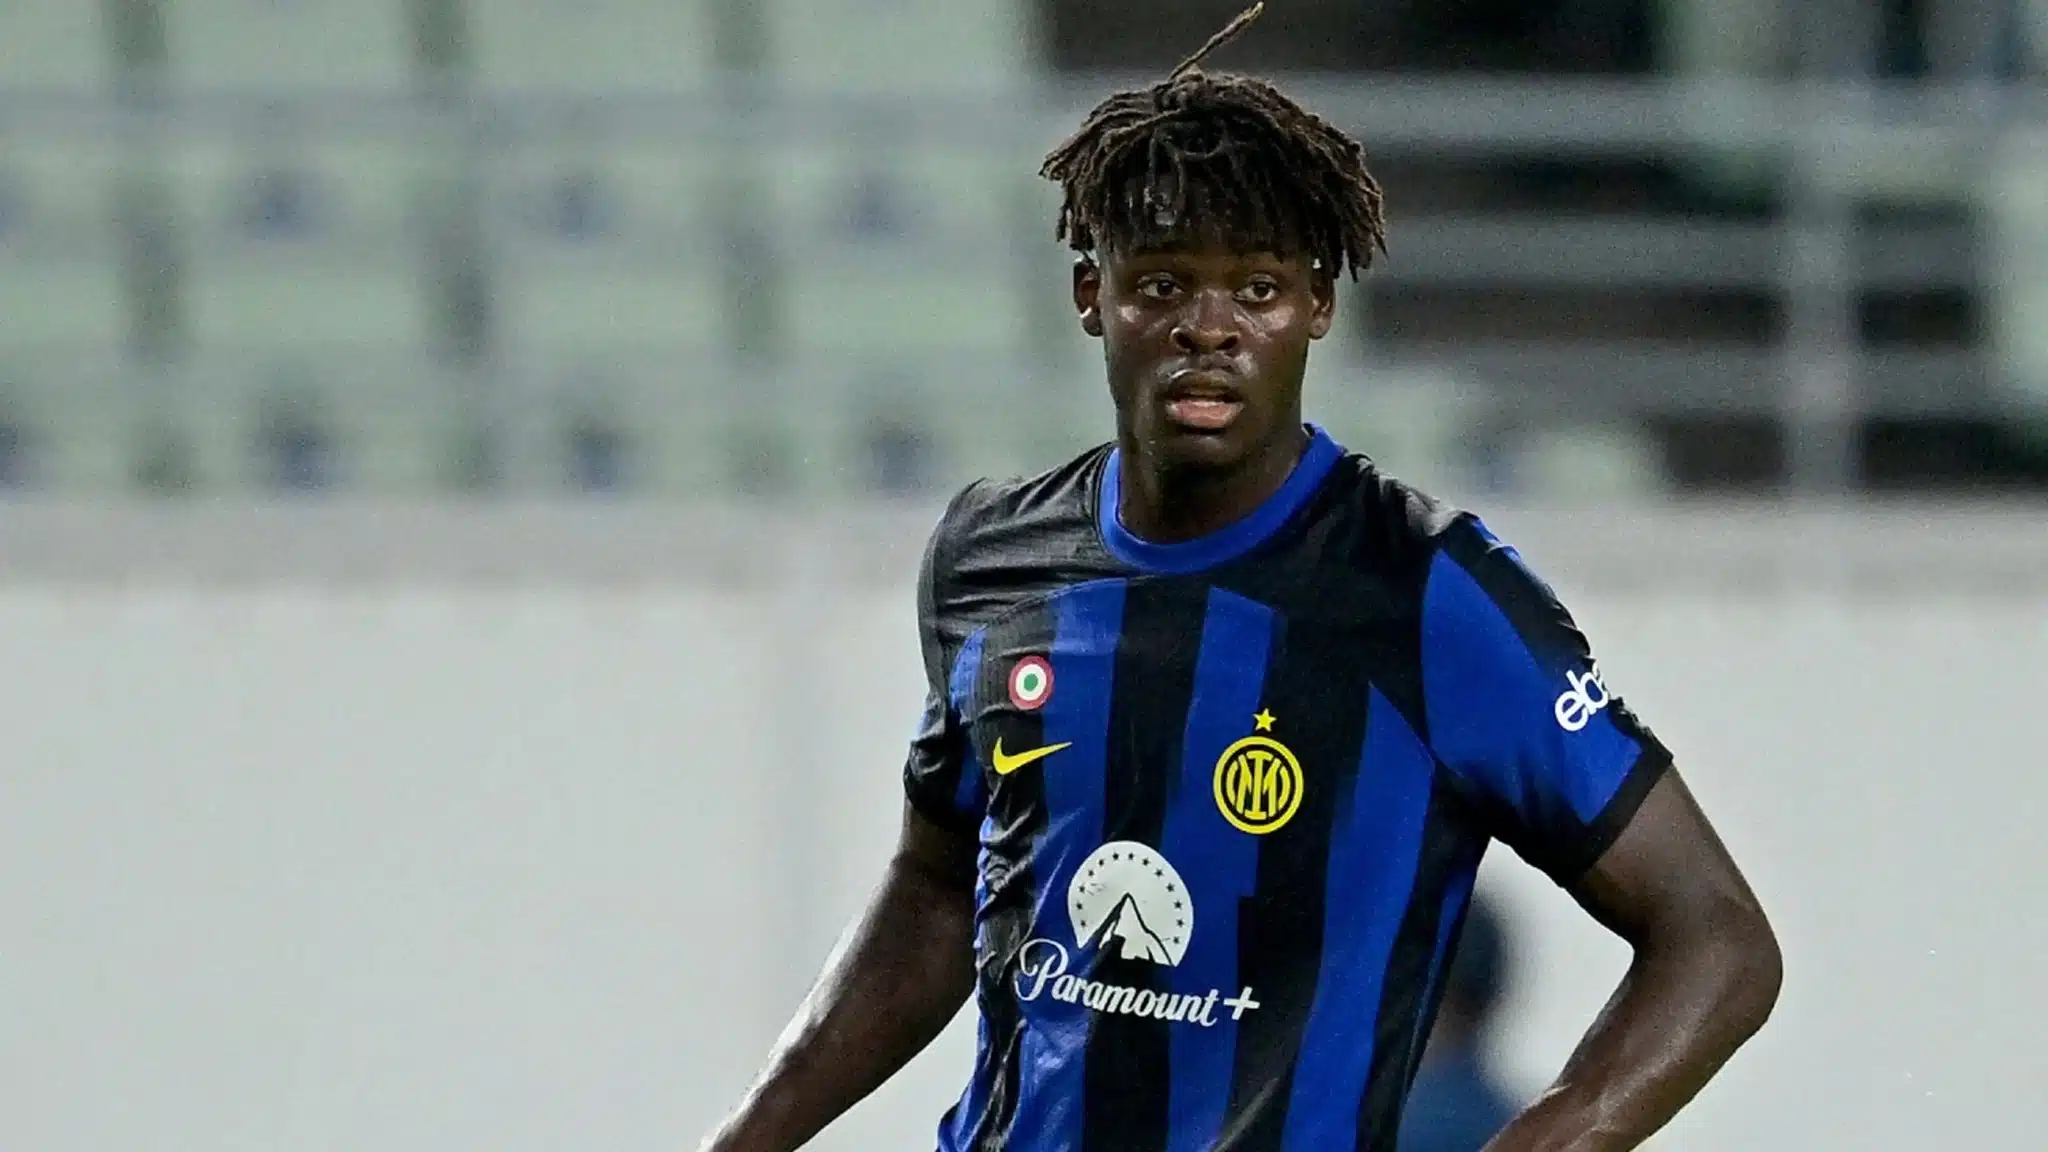 Inter took a flier on Yann Aurel Bisseck early last summer, but he hasn’t gotten many chances to show his skills so far. He has appeared once.